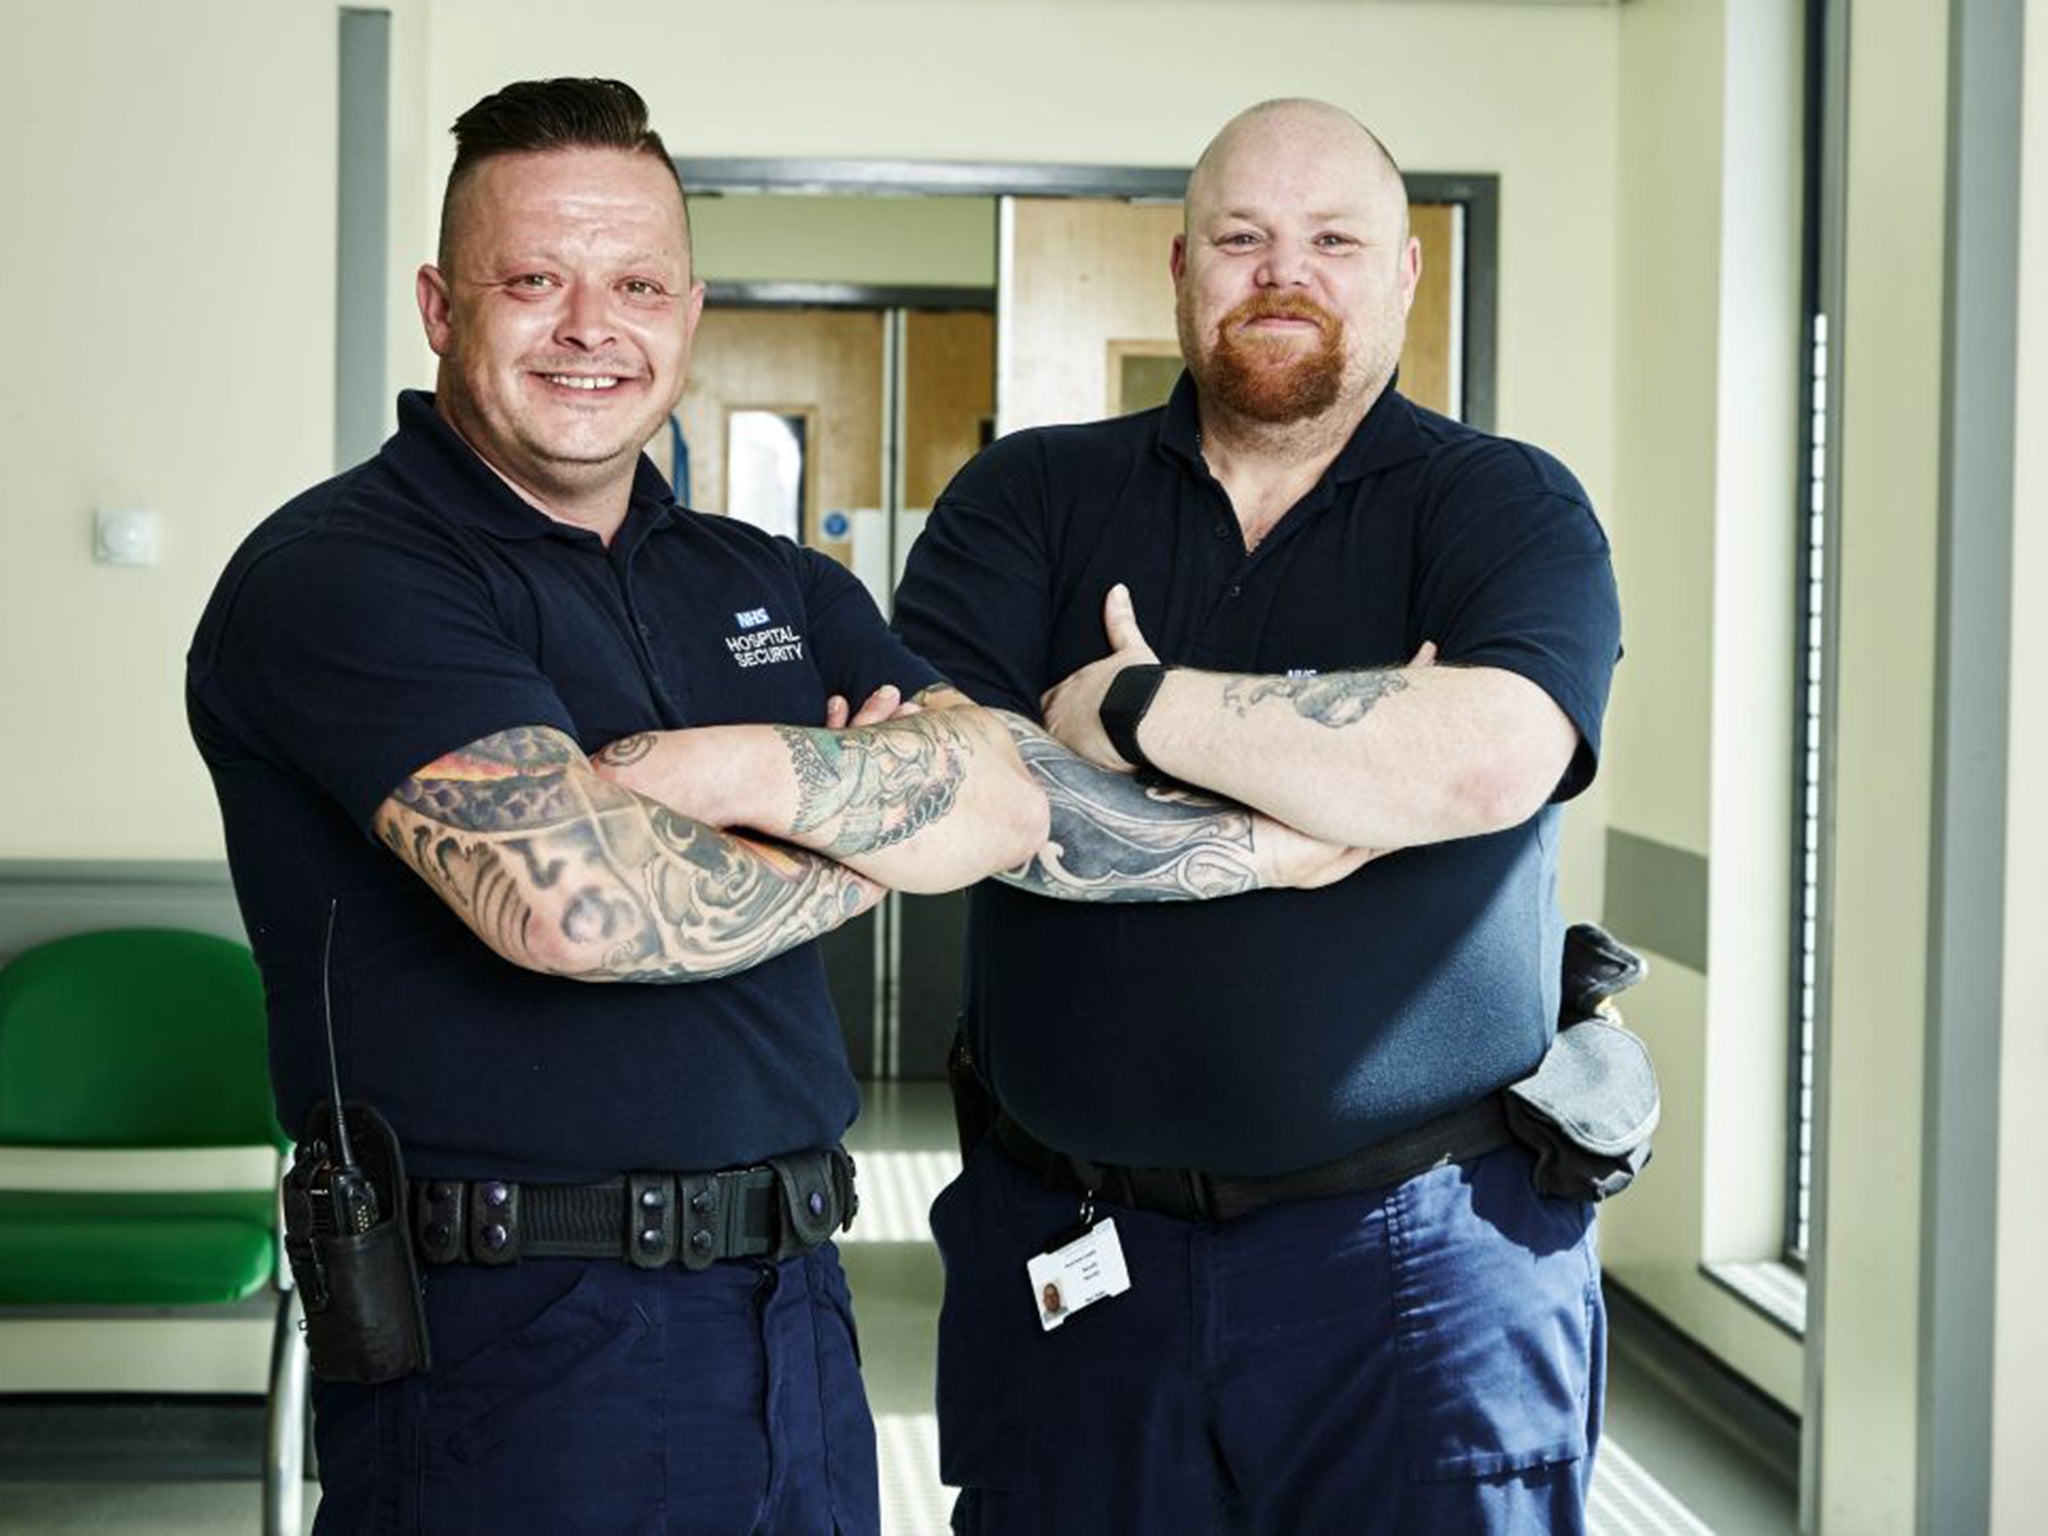 Double dose: ‘Superhospital’ security officers Scott and Malcolm